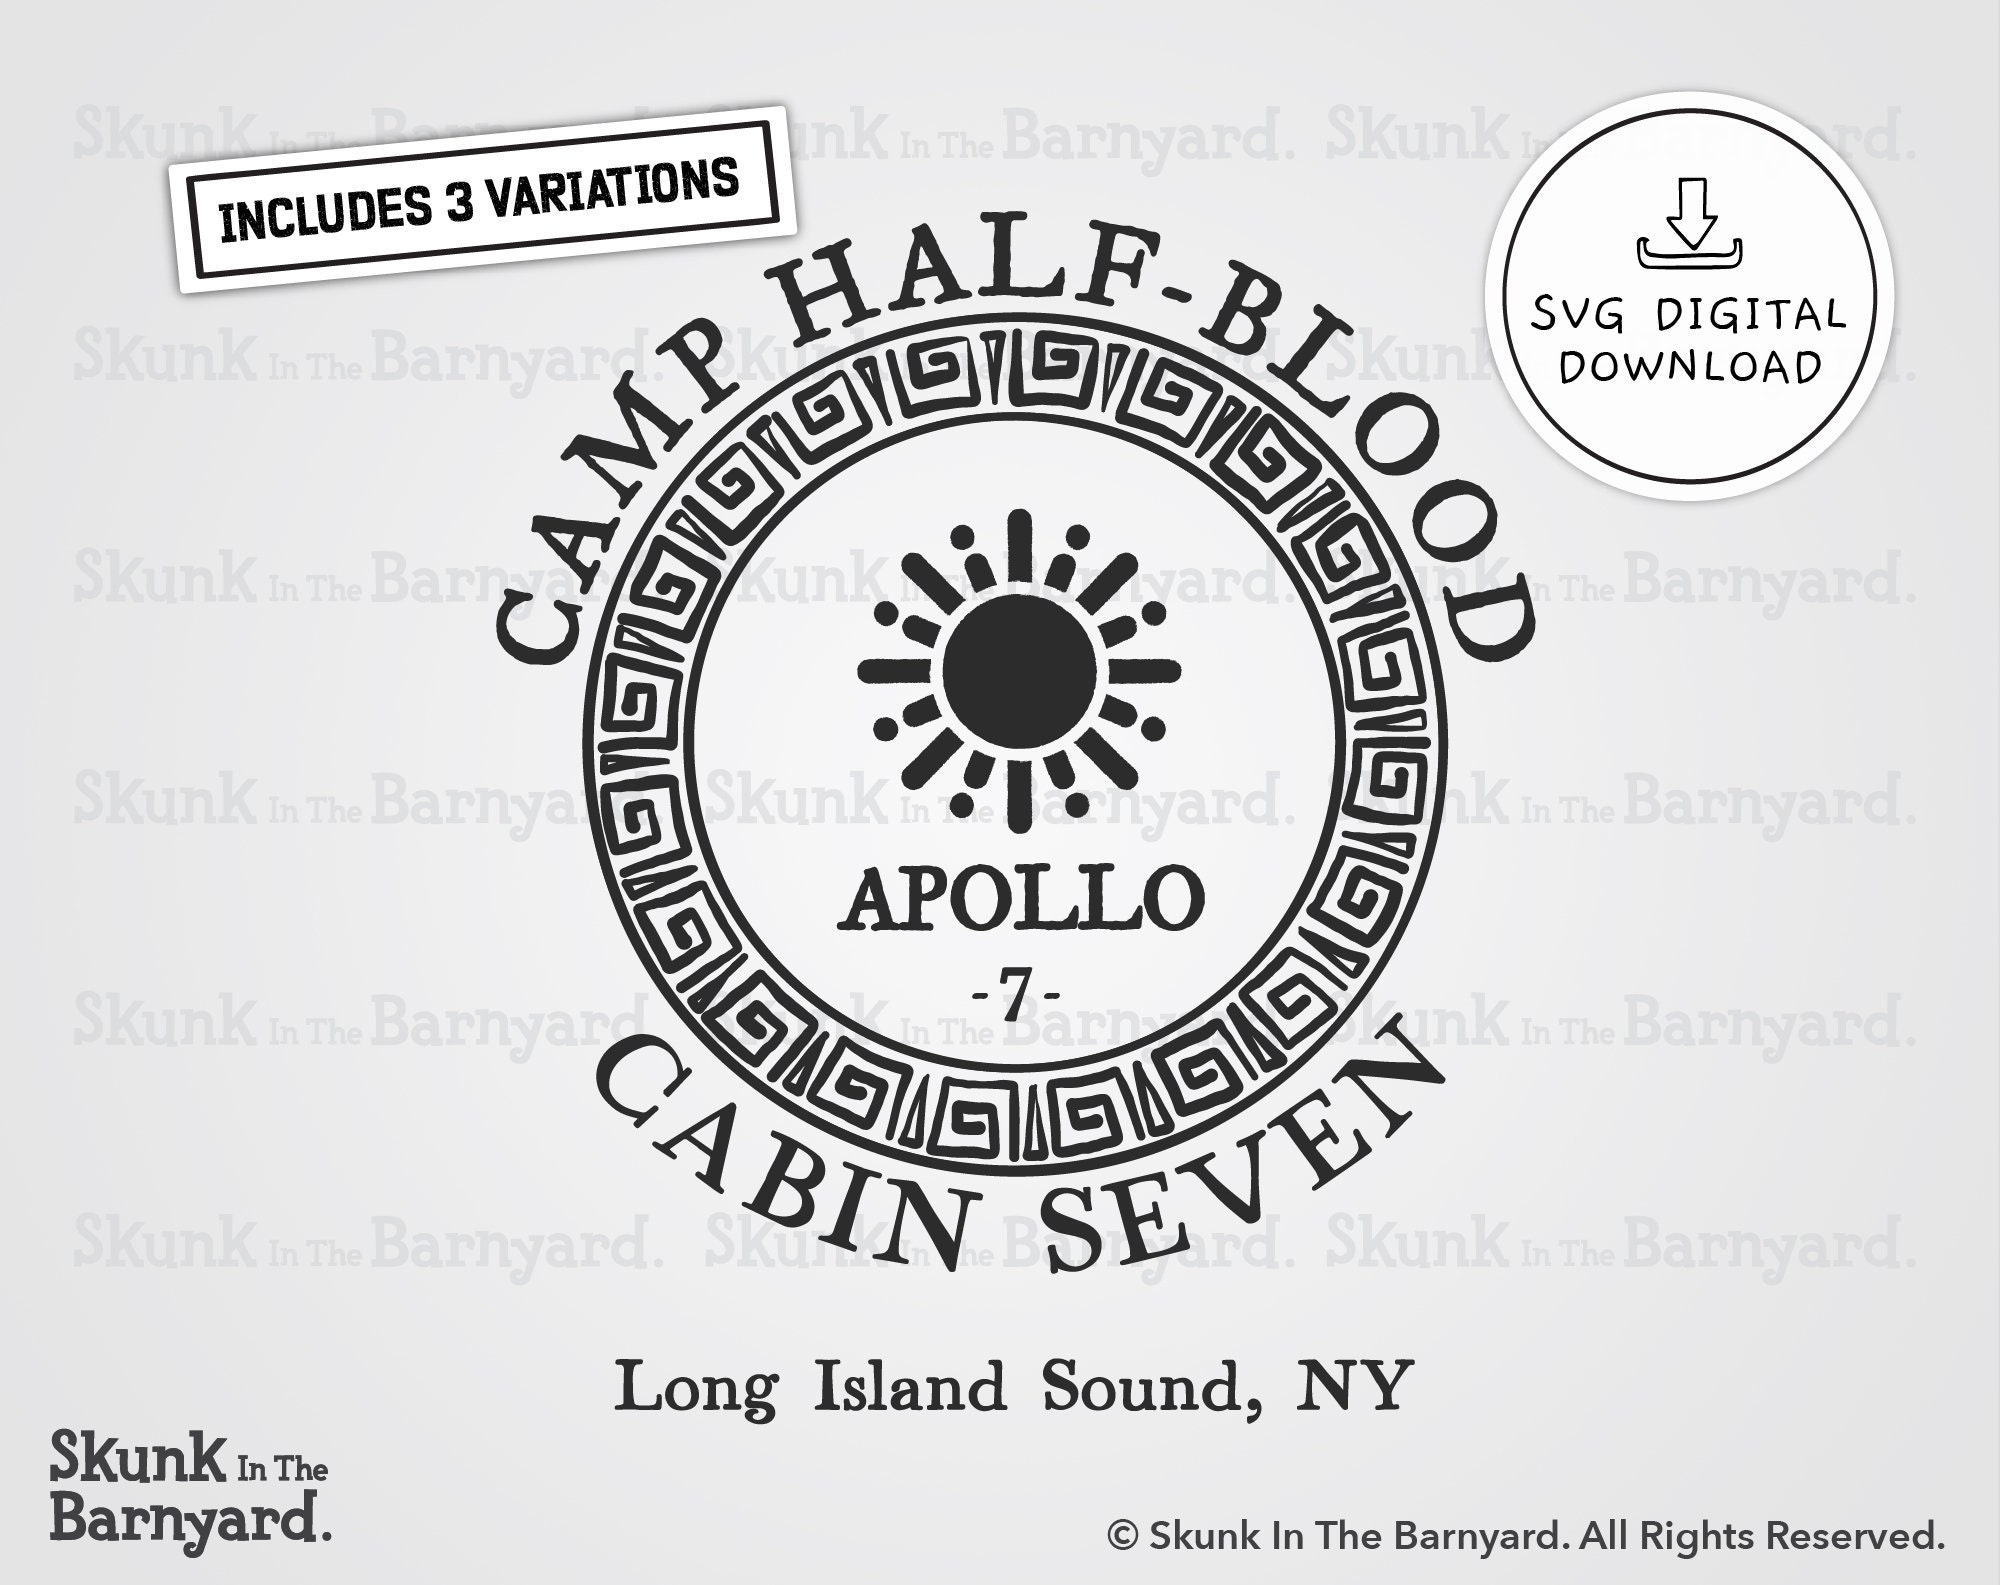 Camp-Half Blood - Cabins: Apollo Cabin Showing 1-3 of 3